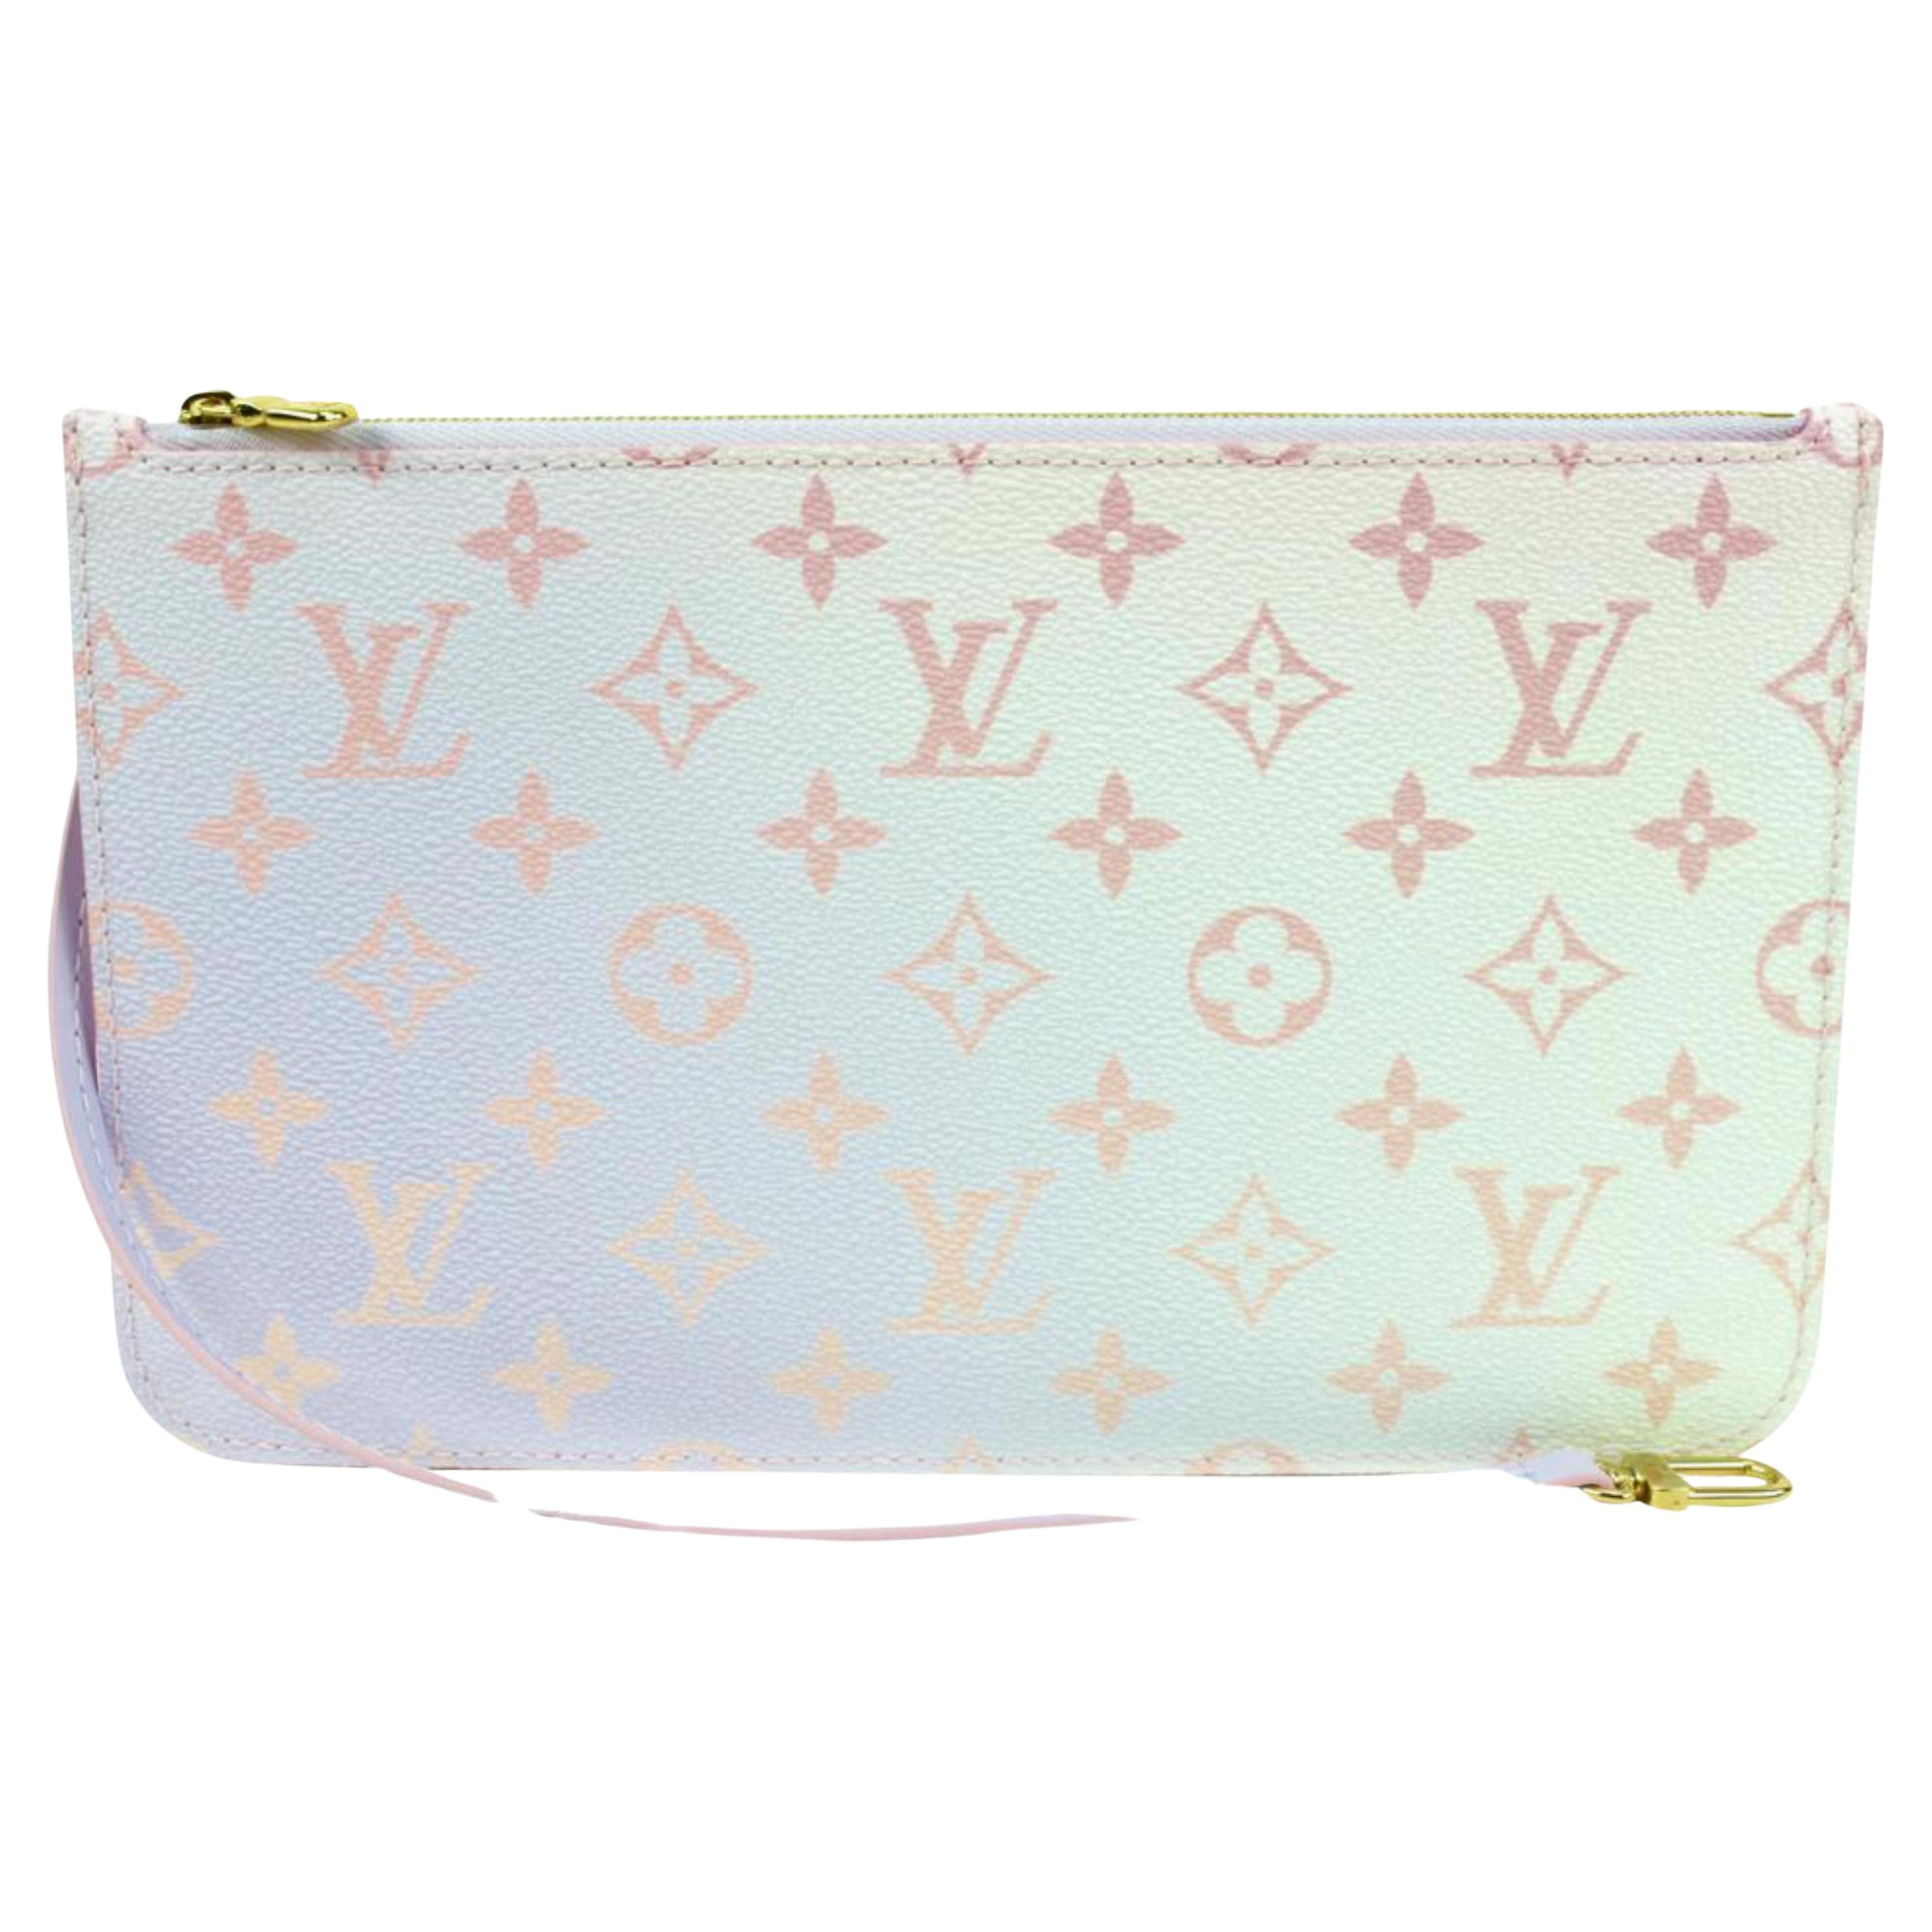 Preloved Limited Edition Louis Vuitton Sunrise Pastel Giant Monogram Canvas mm Neverfull Tote XGXMHBM 080923 Off